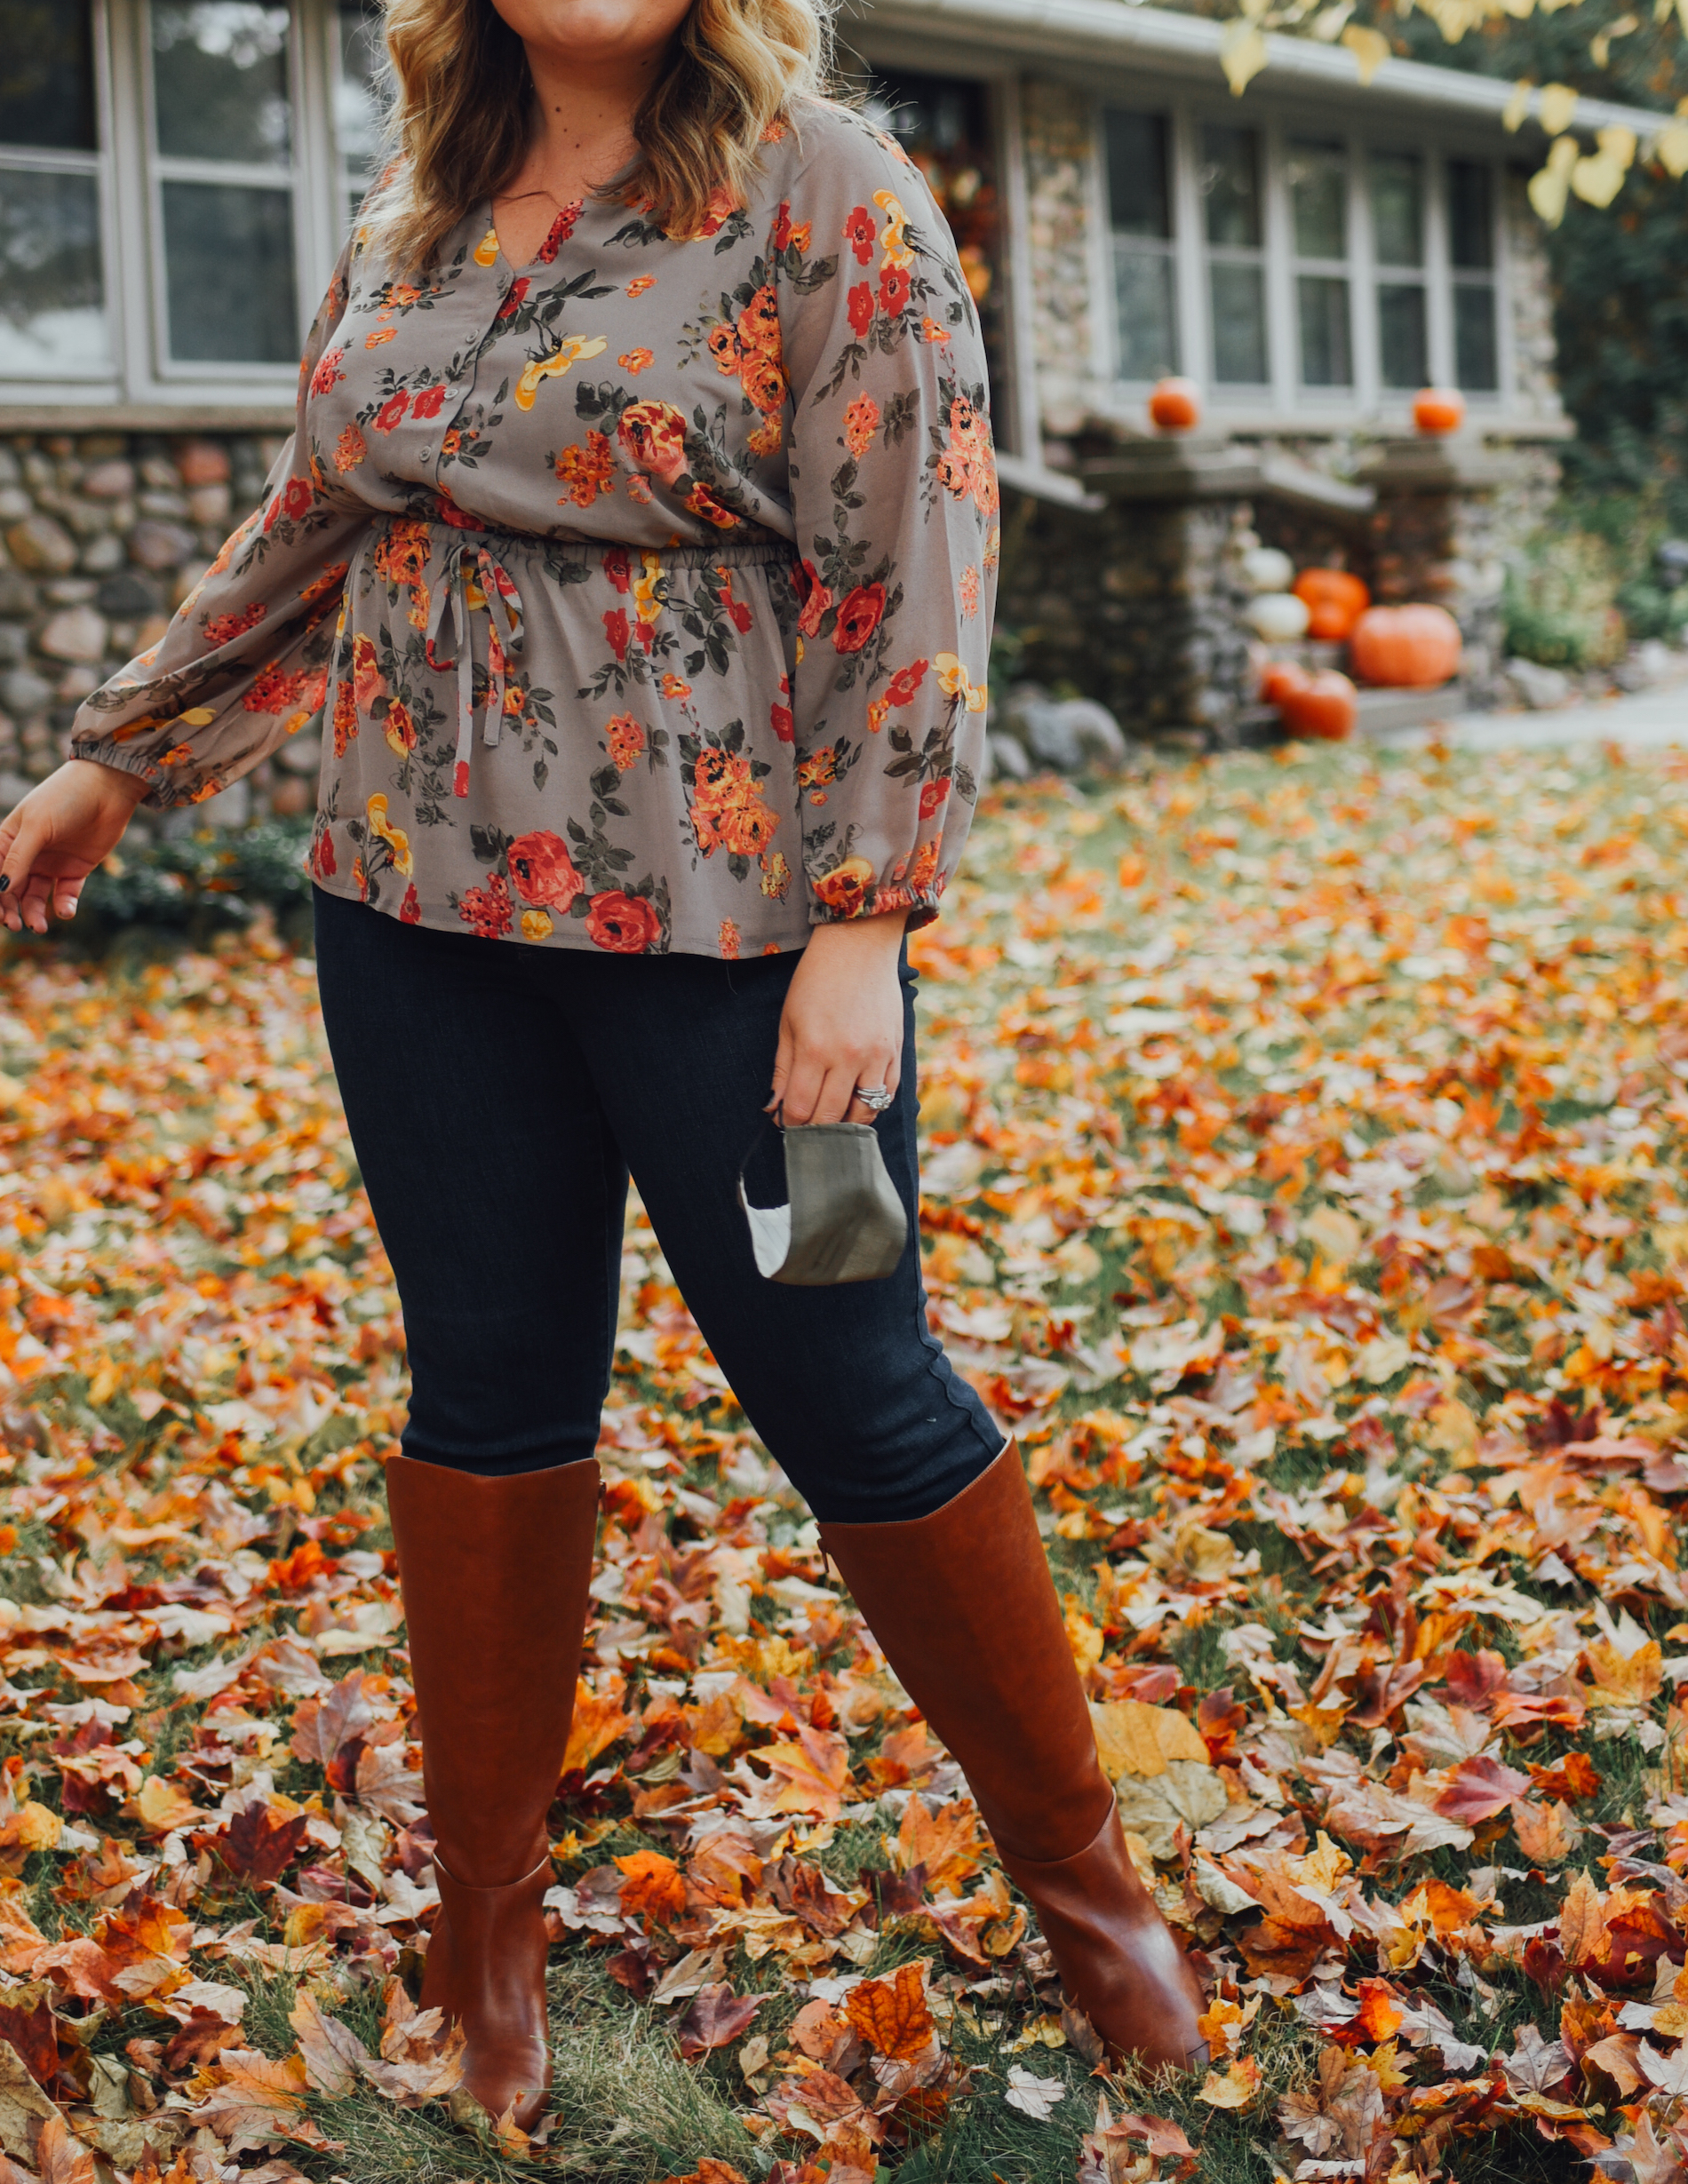 Lane Bryant Jeggings are a force to be reckoned with! They are perfect for fall dressing and come in so many fabulous washes! 